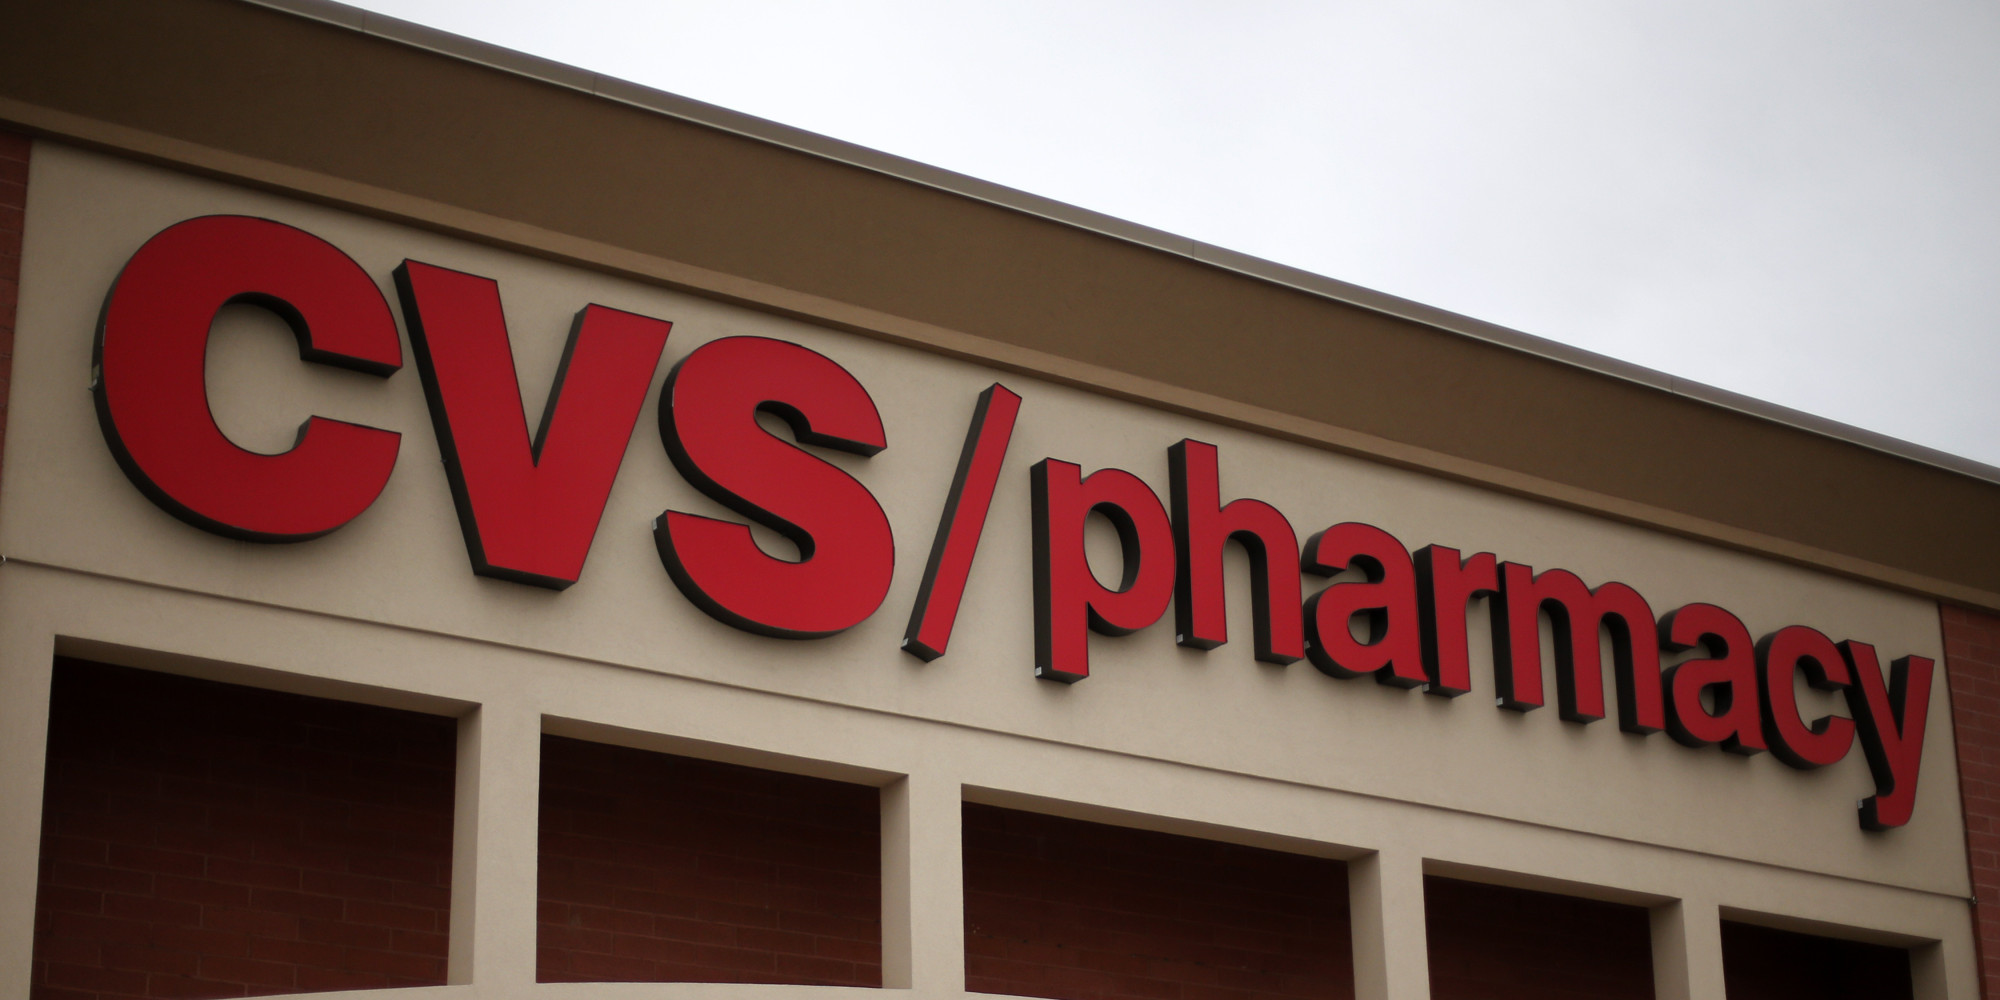 cvs health quits chamber of commerce over tobacco stance